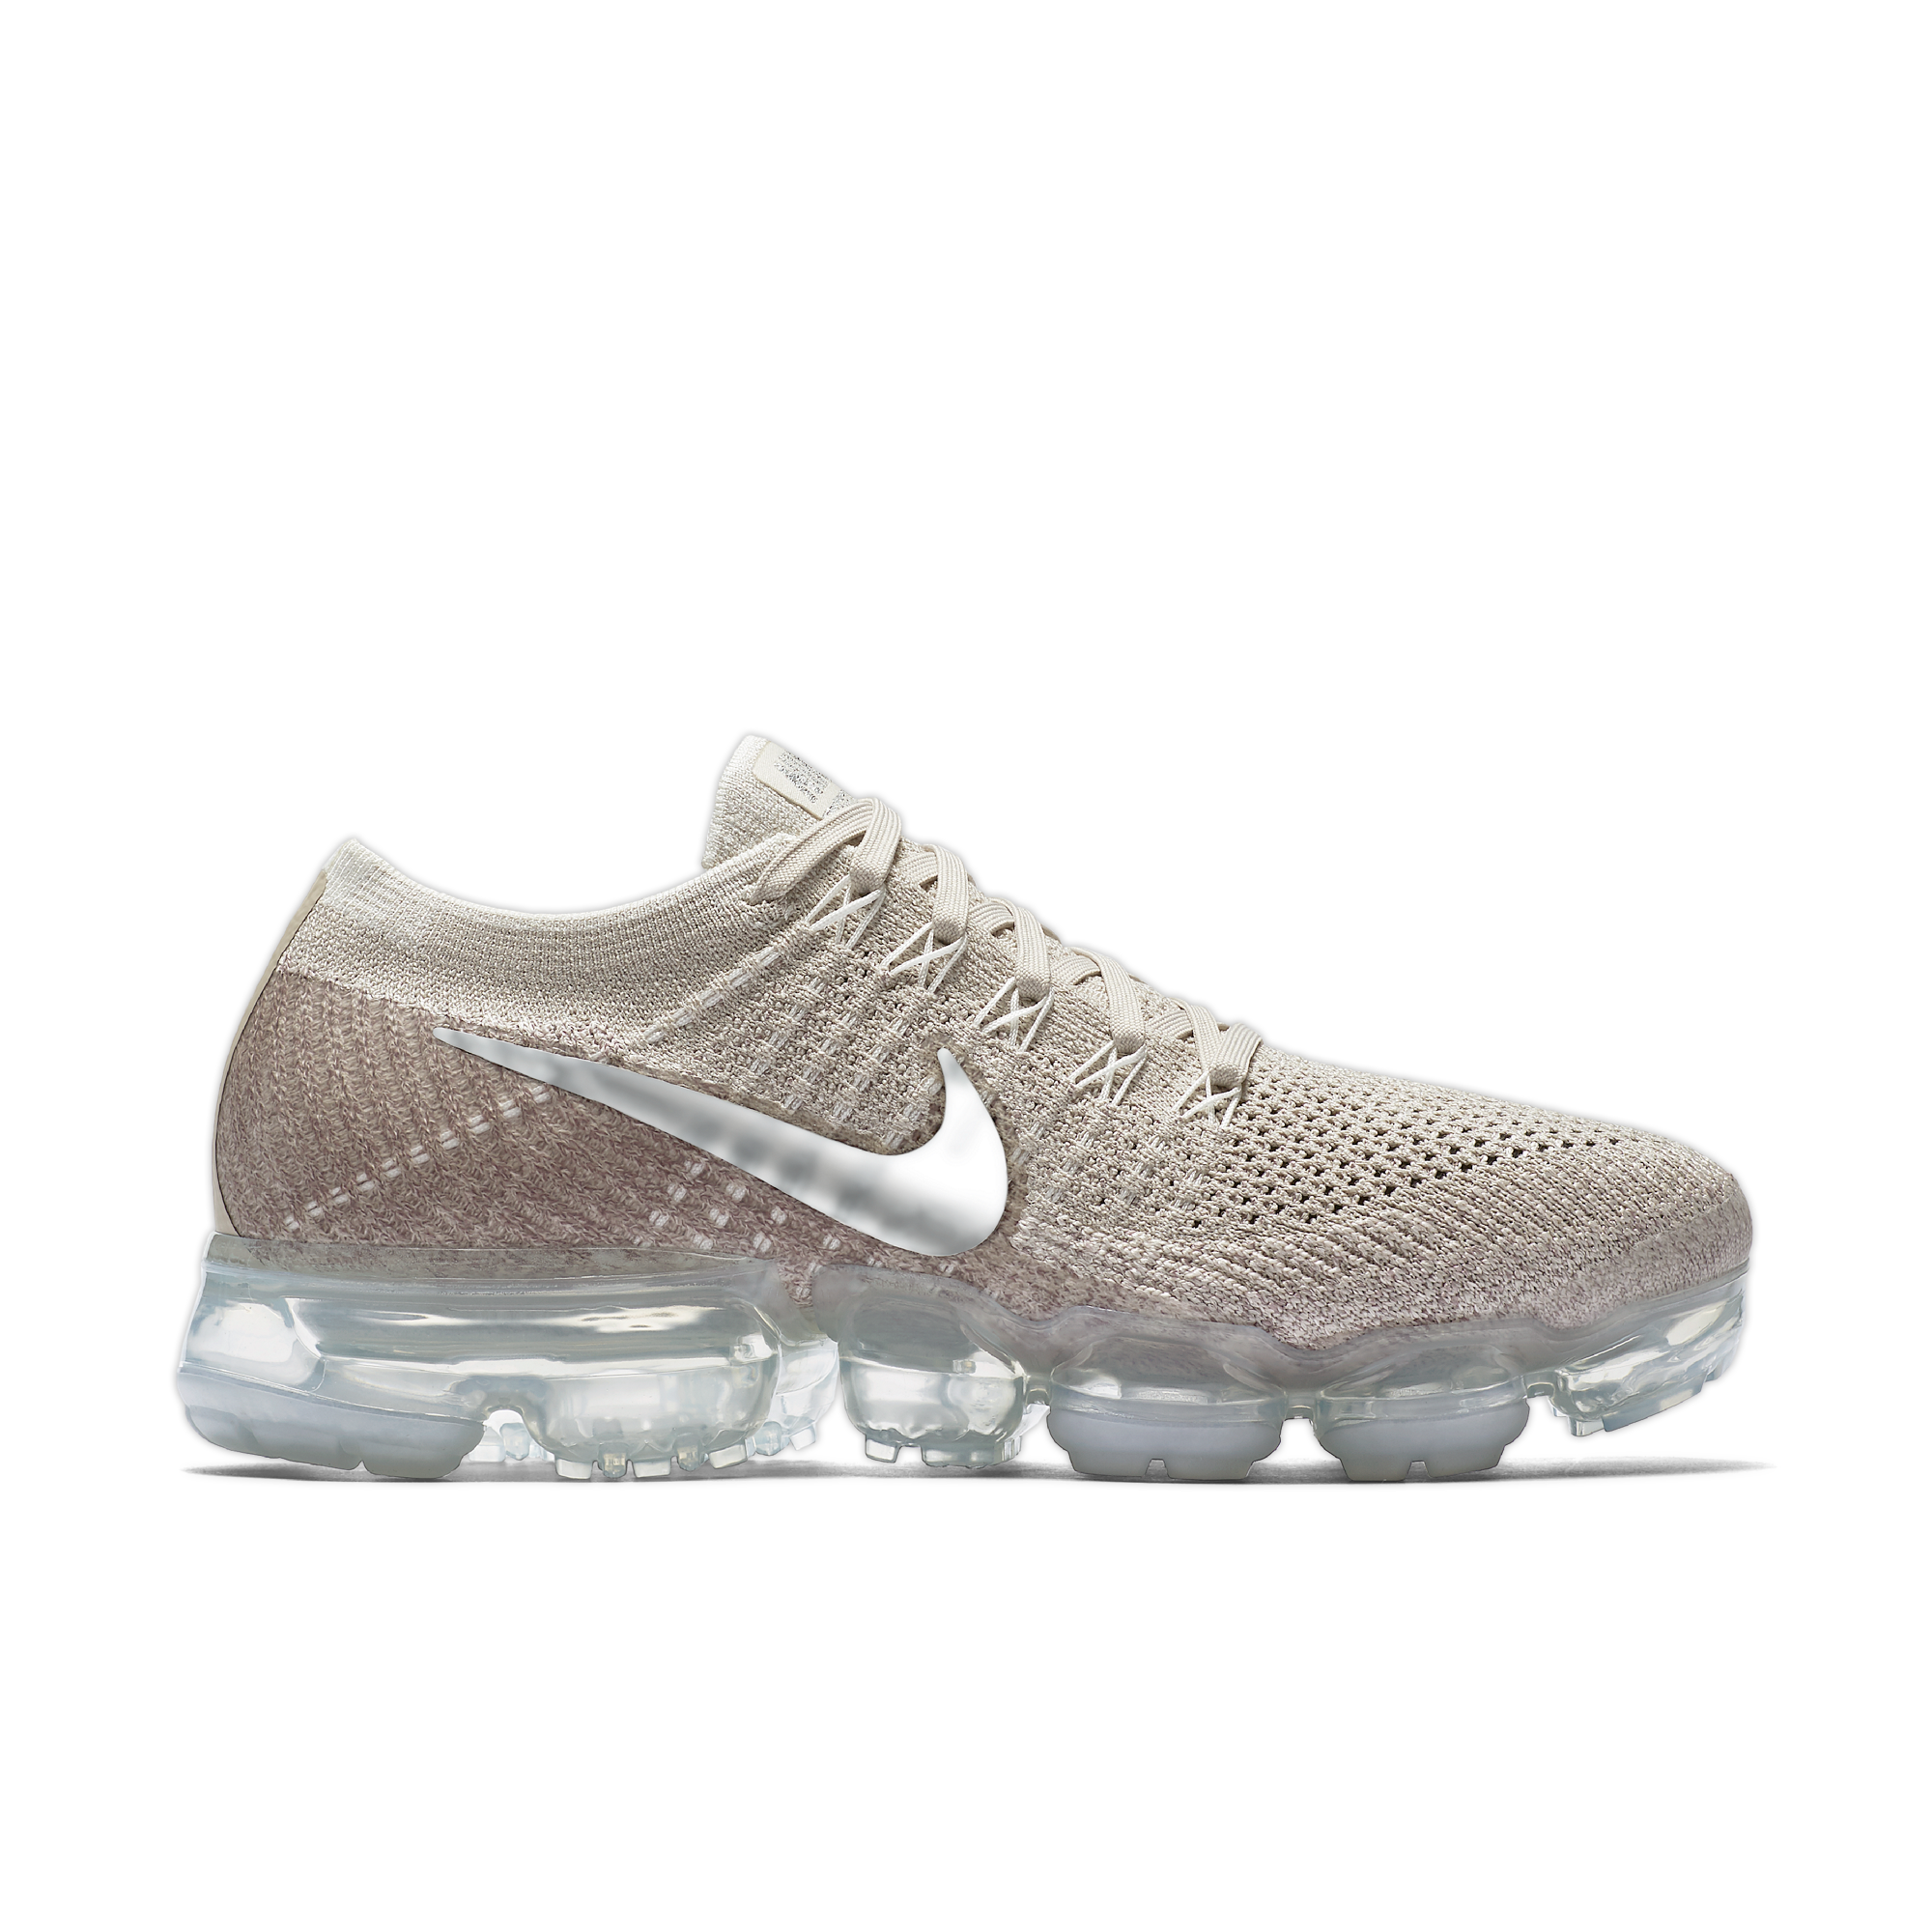 vapormax with no strings